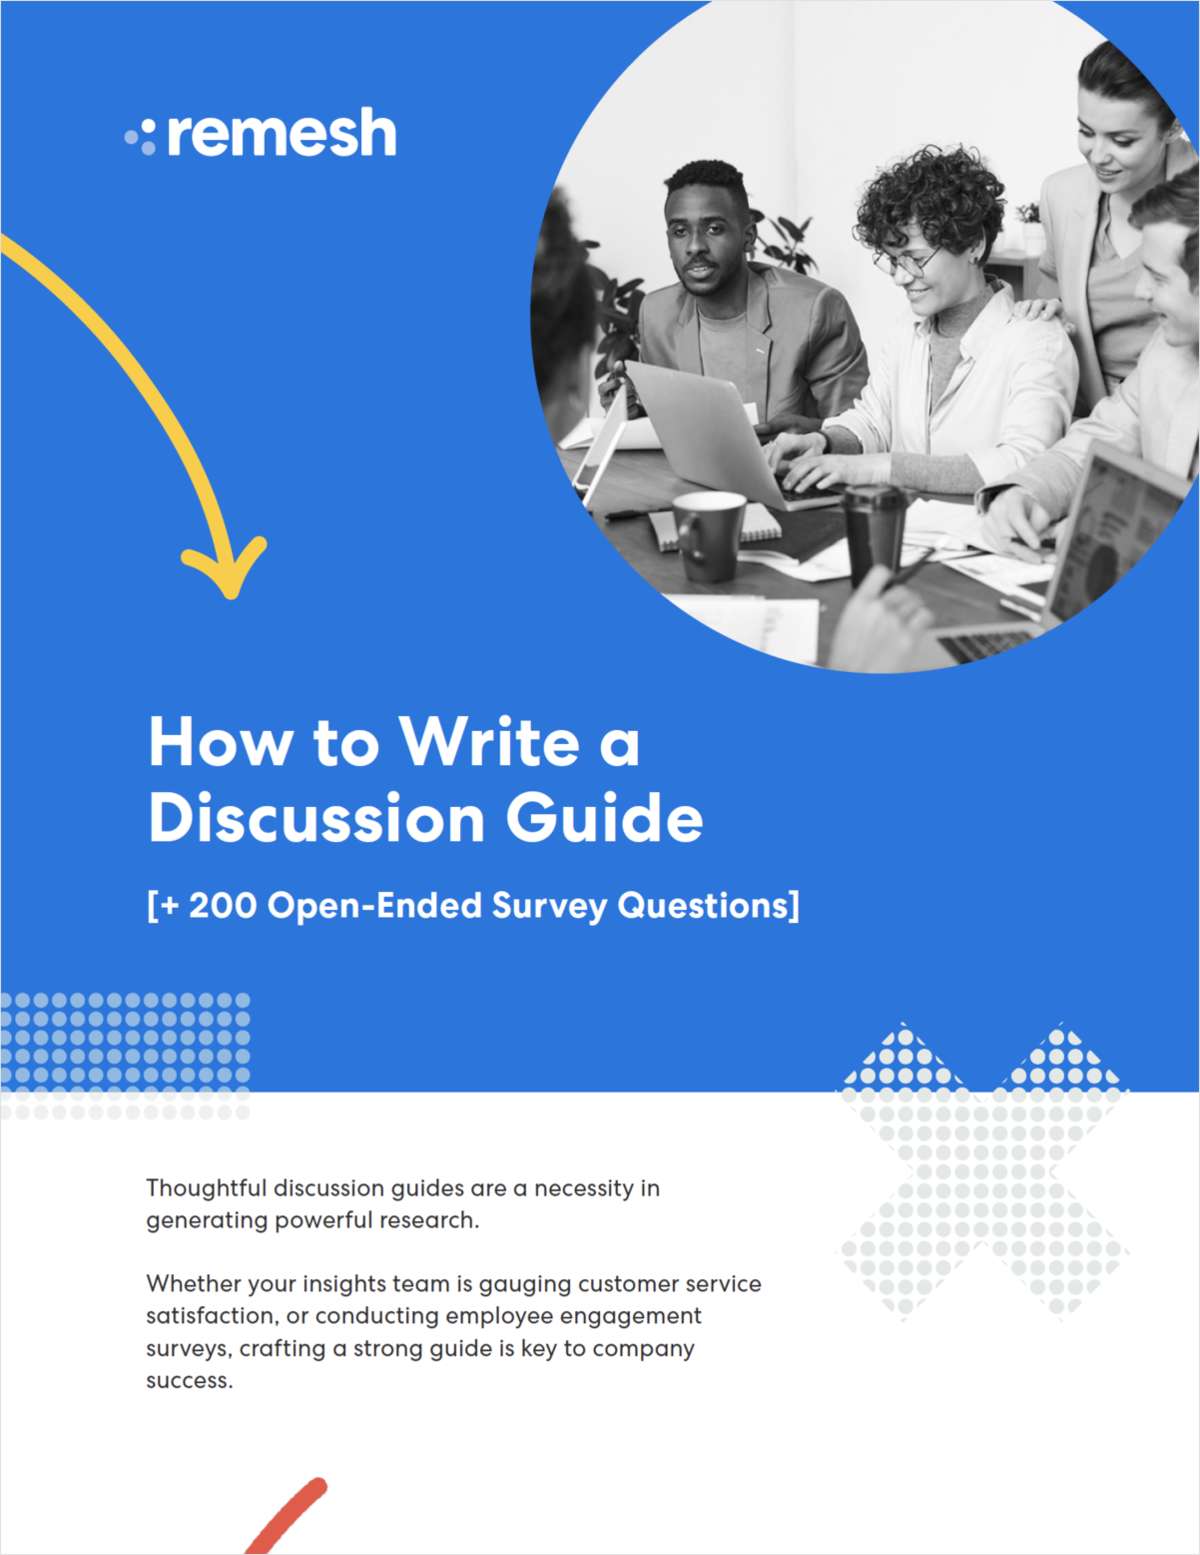 How to Write a Discussion Guide [+ 200 Survey Questions]